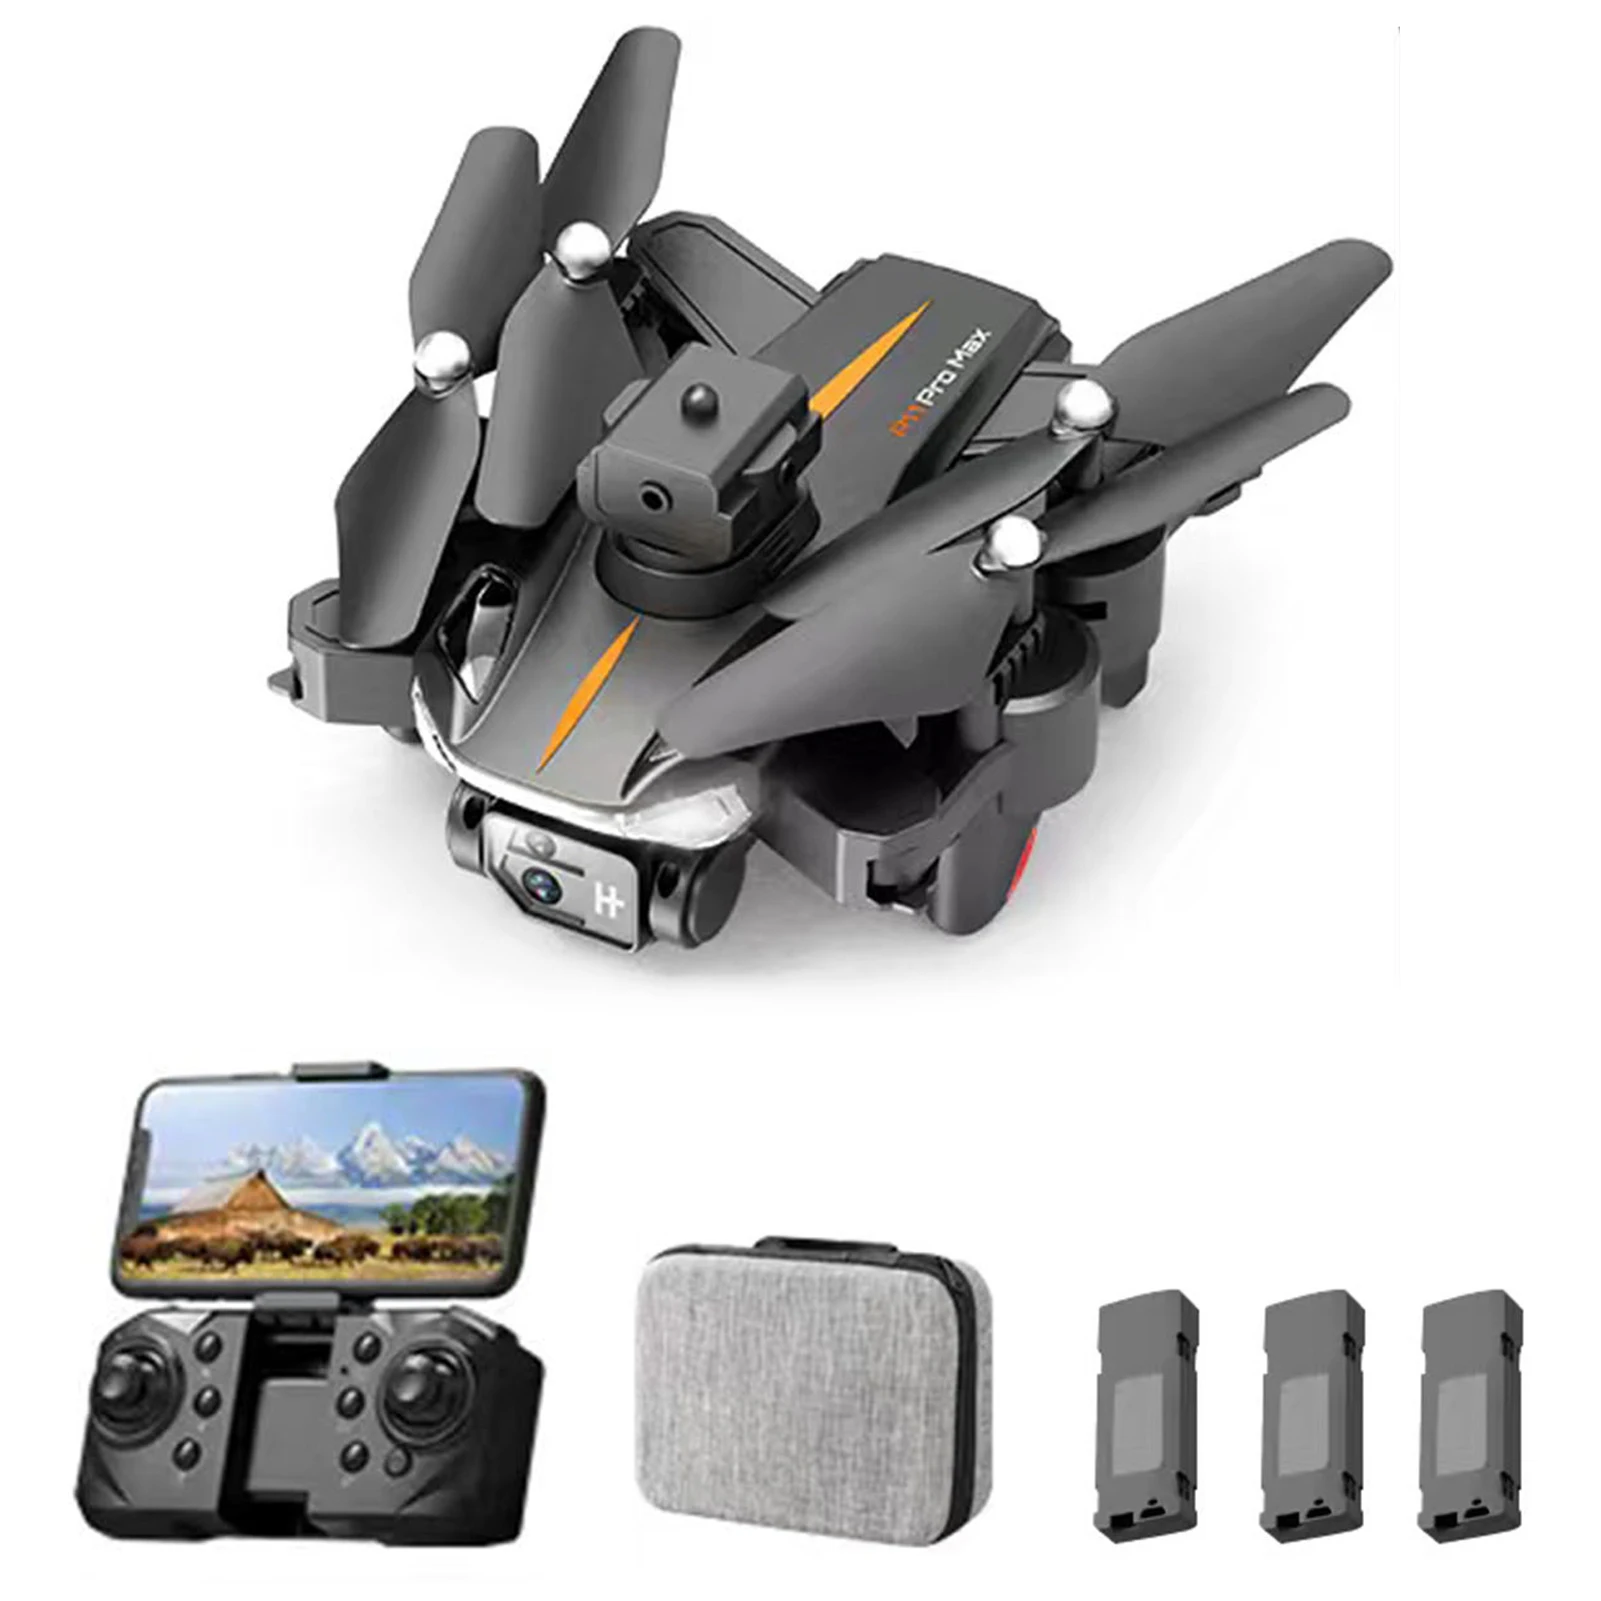 Drone 1080P 5G WiFi Dual Camera Dron Professional HD Aerial Photography Camera - $142.71+